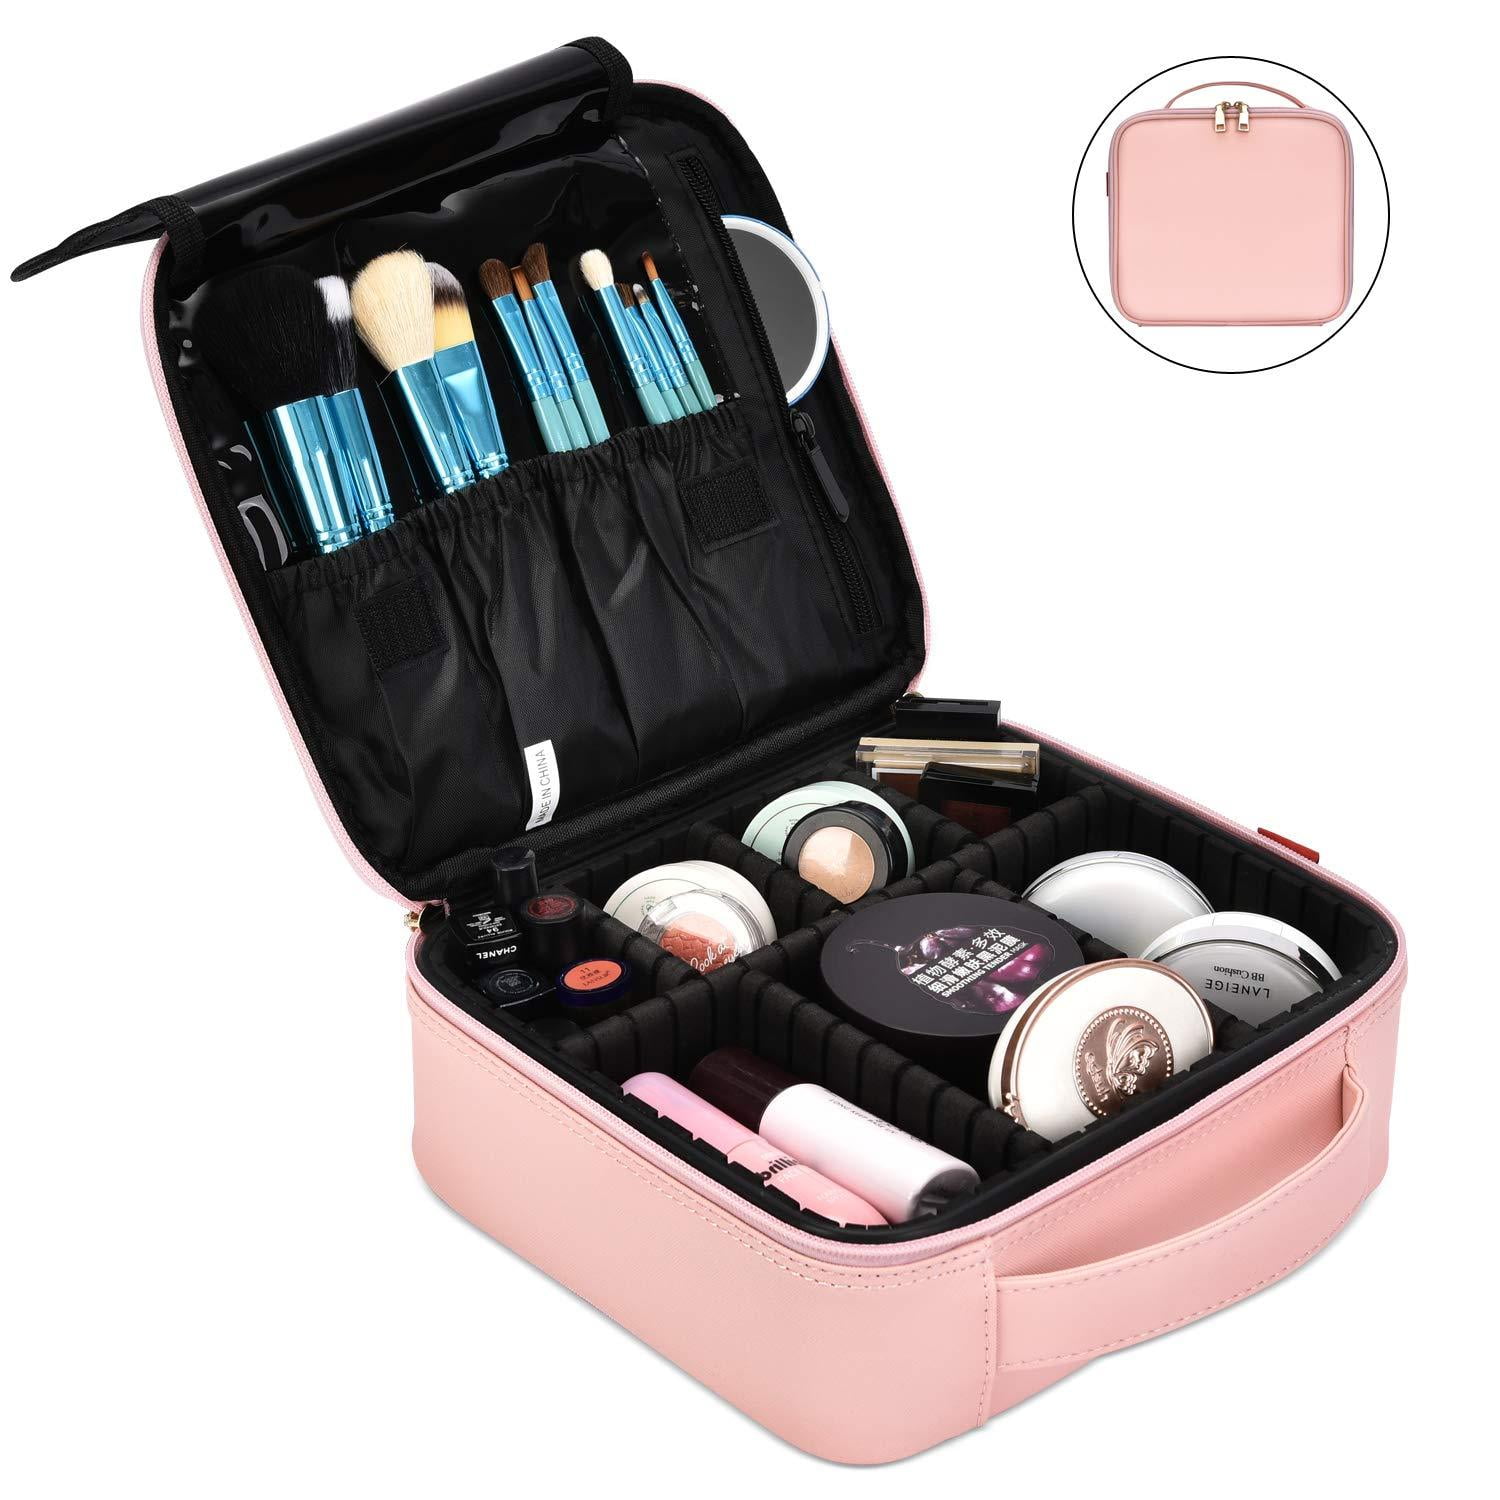 Makeup Bag Travel Cosmetic Bag for Women Cute Makeup Case Large Leather  Cosmetic Train Case Organizer with Adjustable Dividers for Cosmetics Make  Up